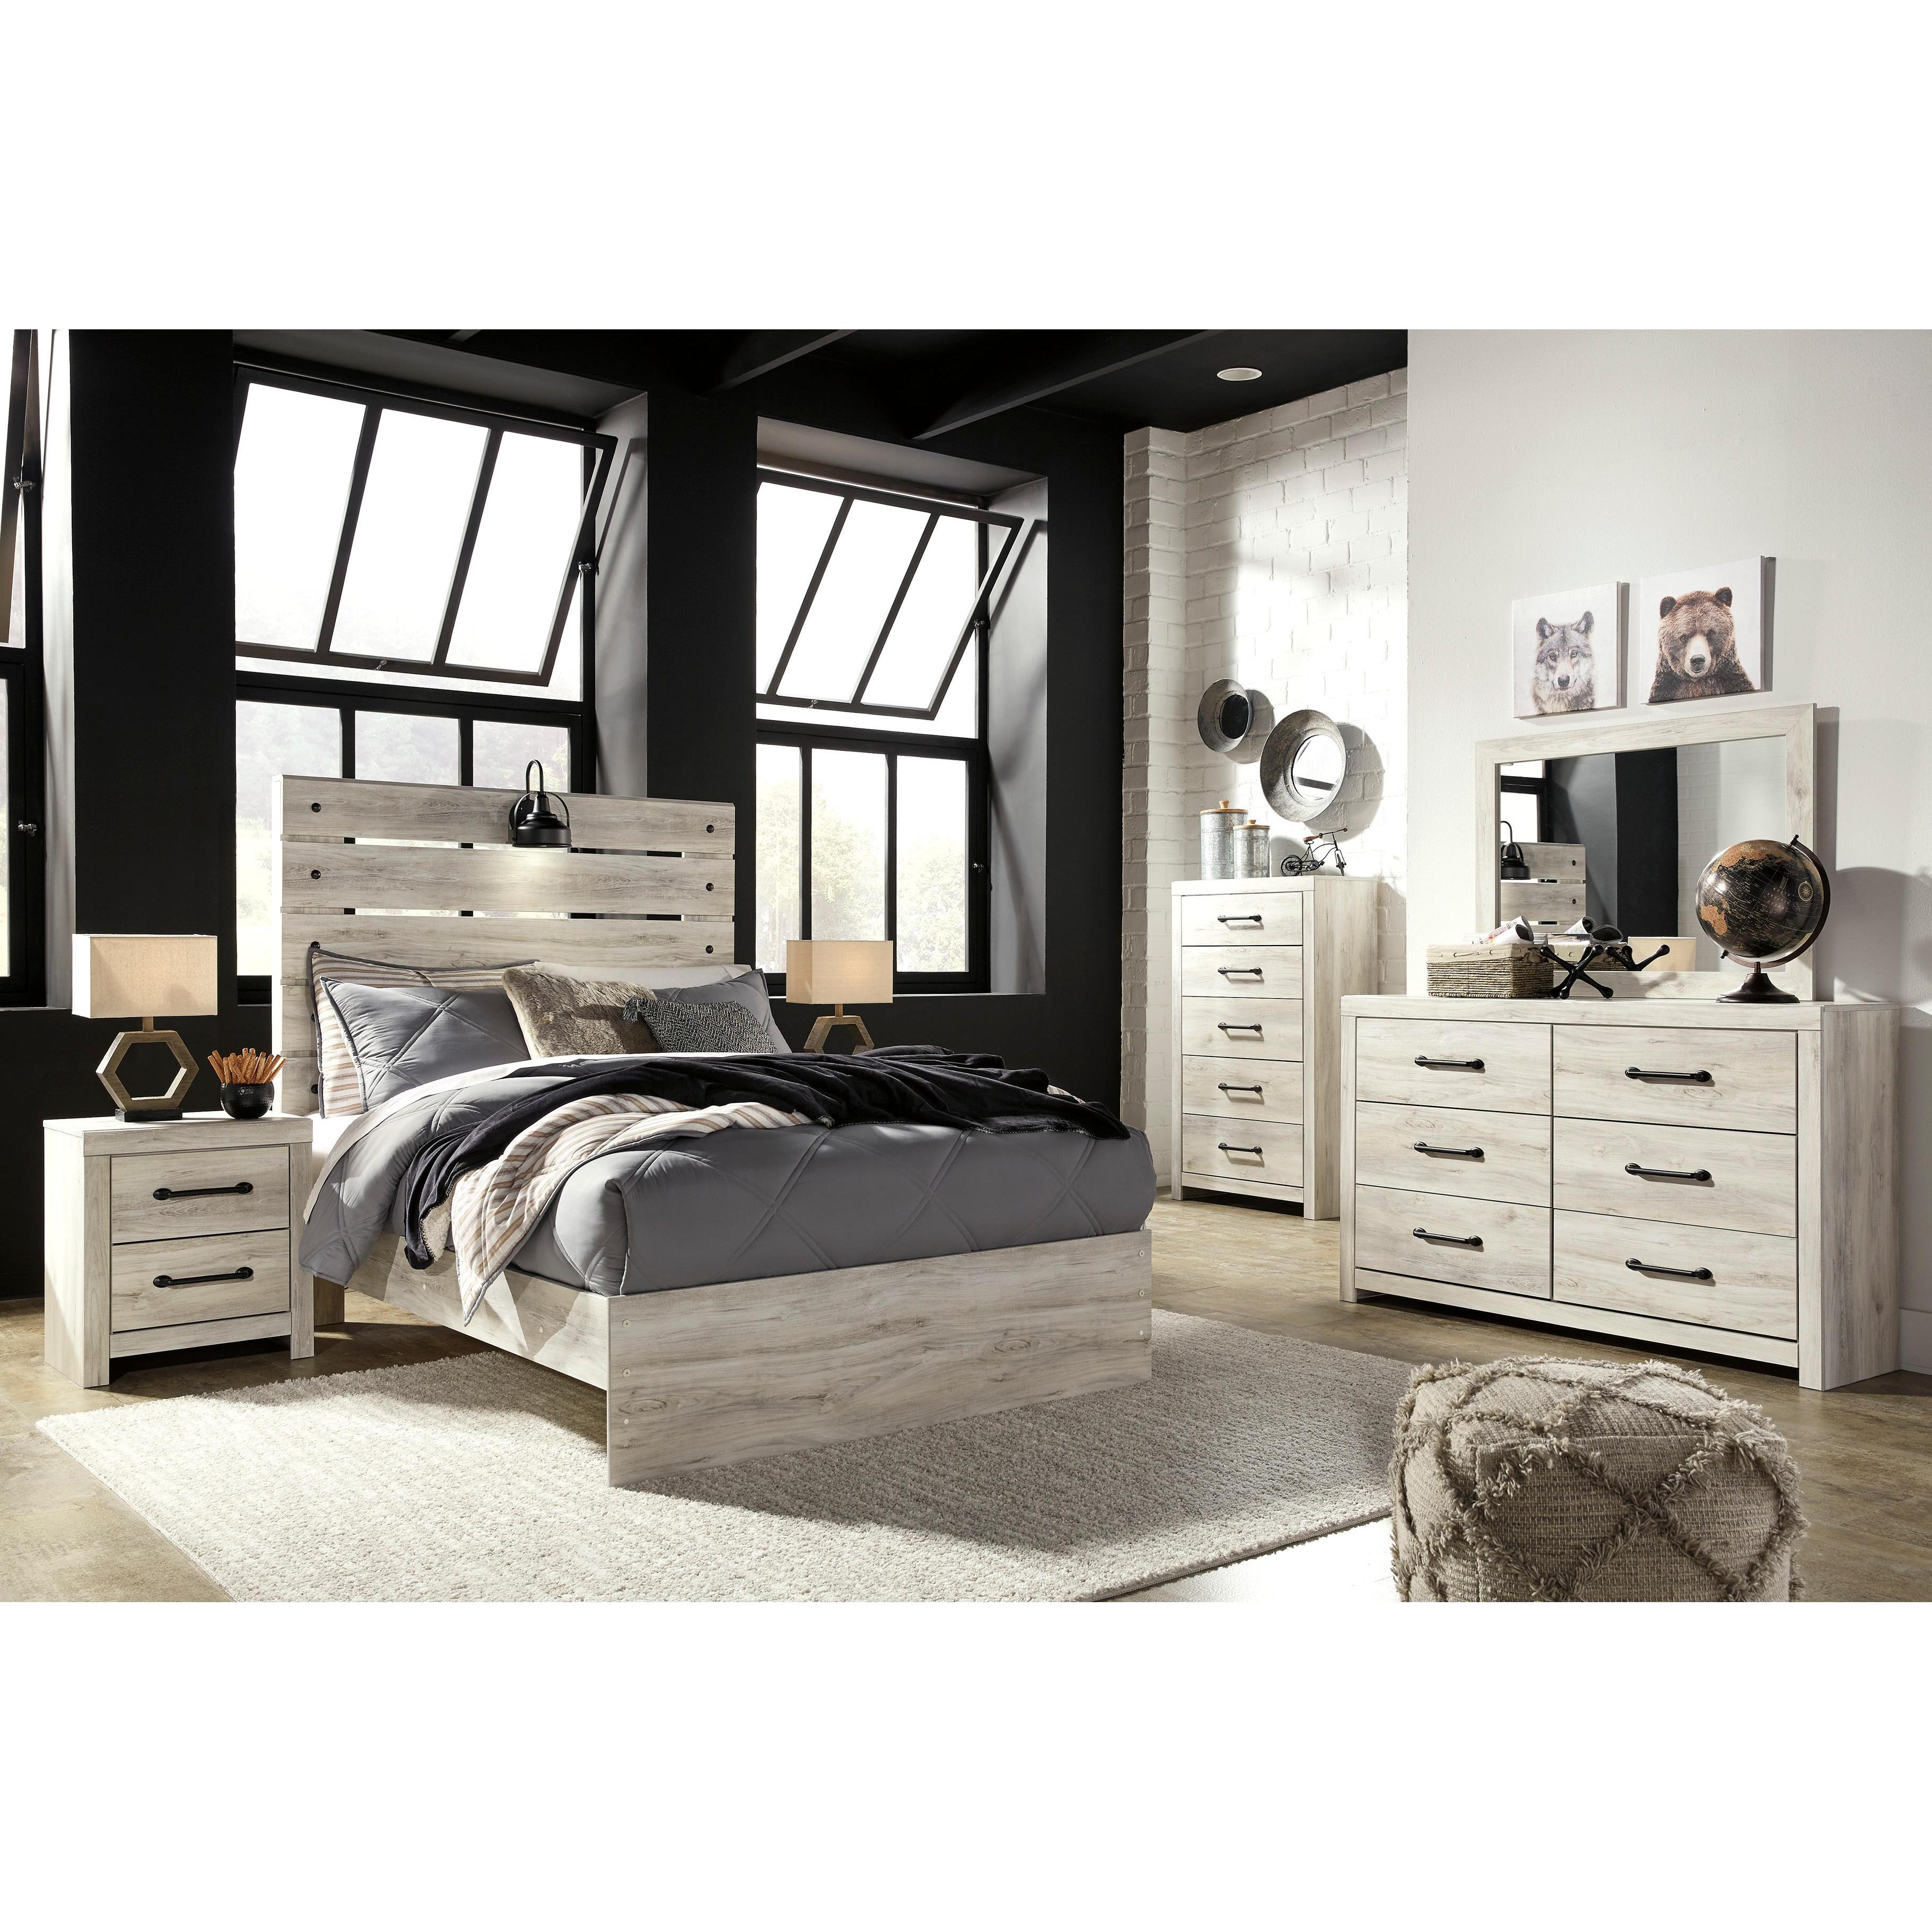 Signature Design by Ashley Cambeck B192 6 pc Full Panel Bedroom Set IMAGE 1